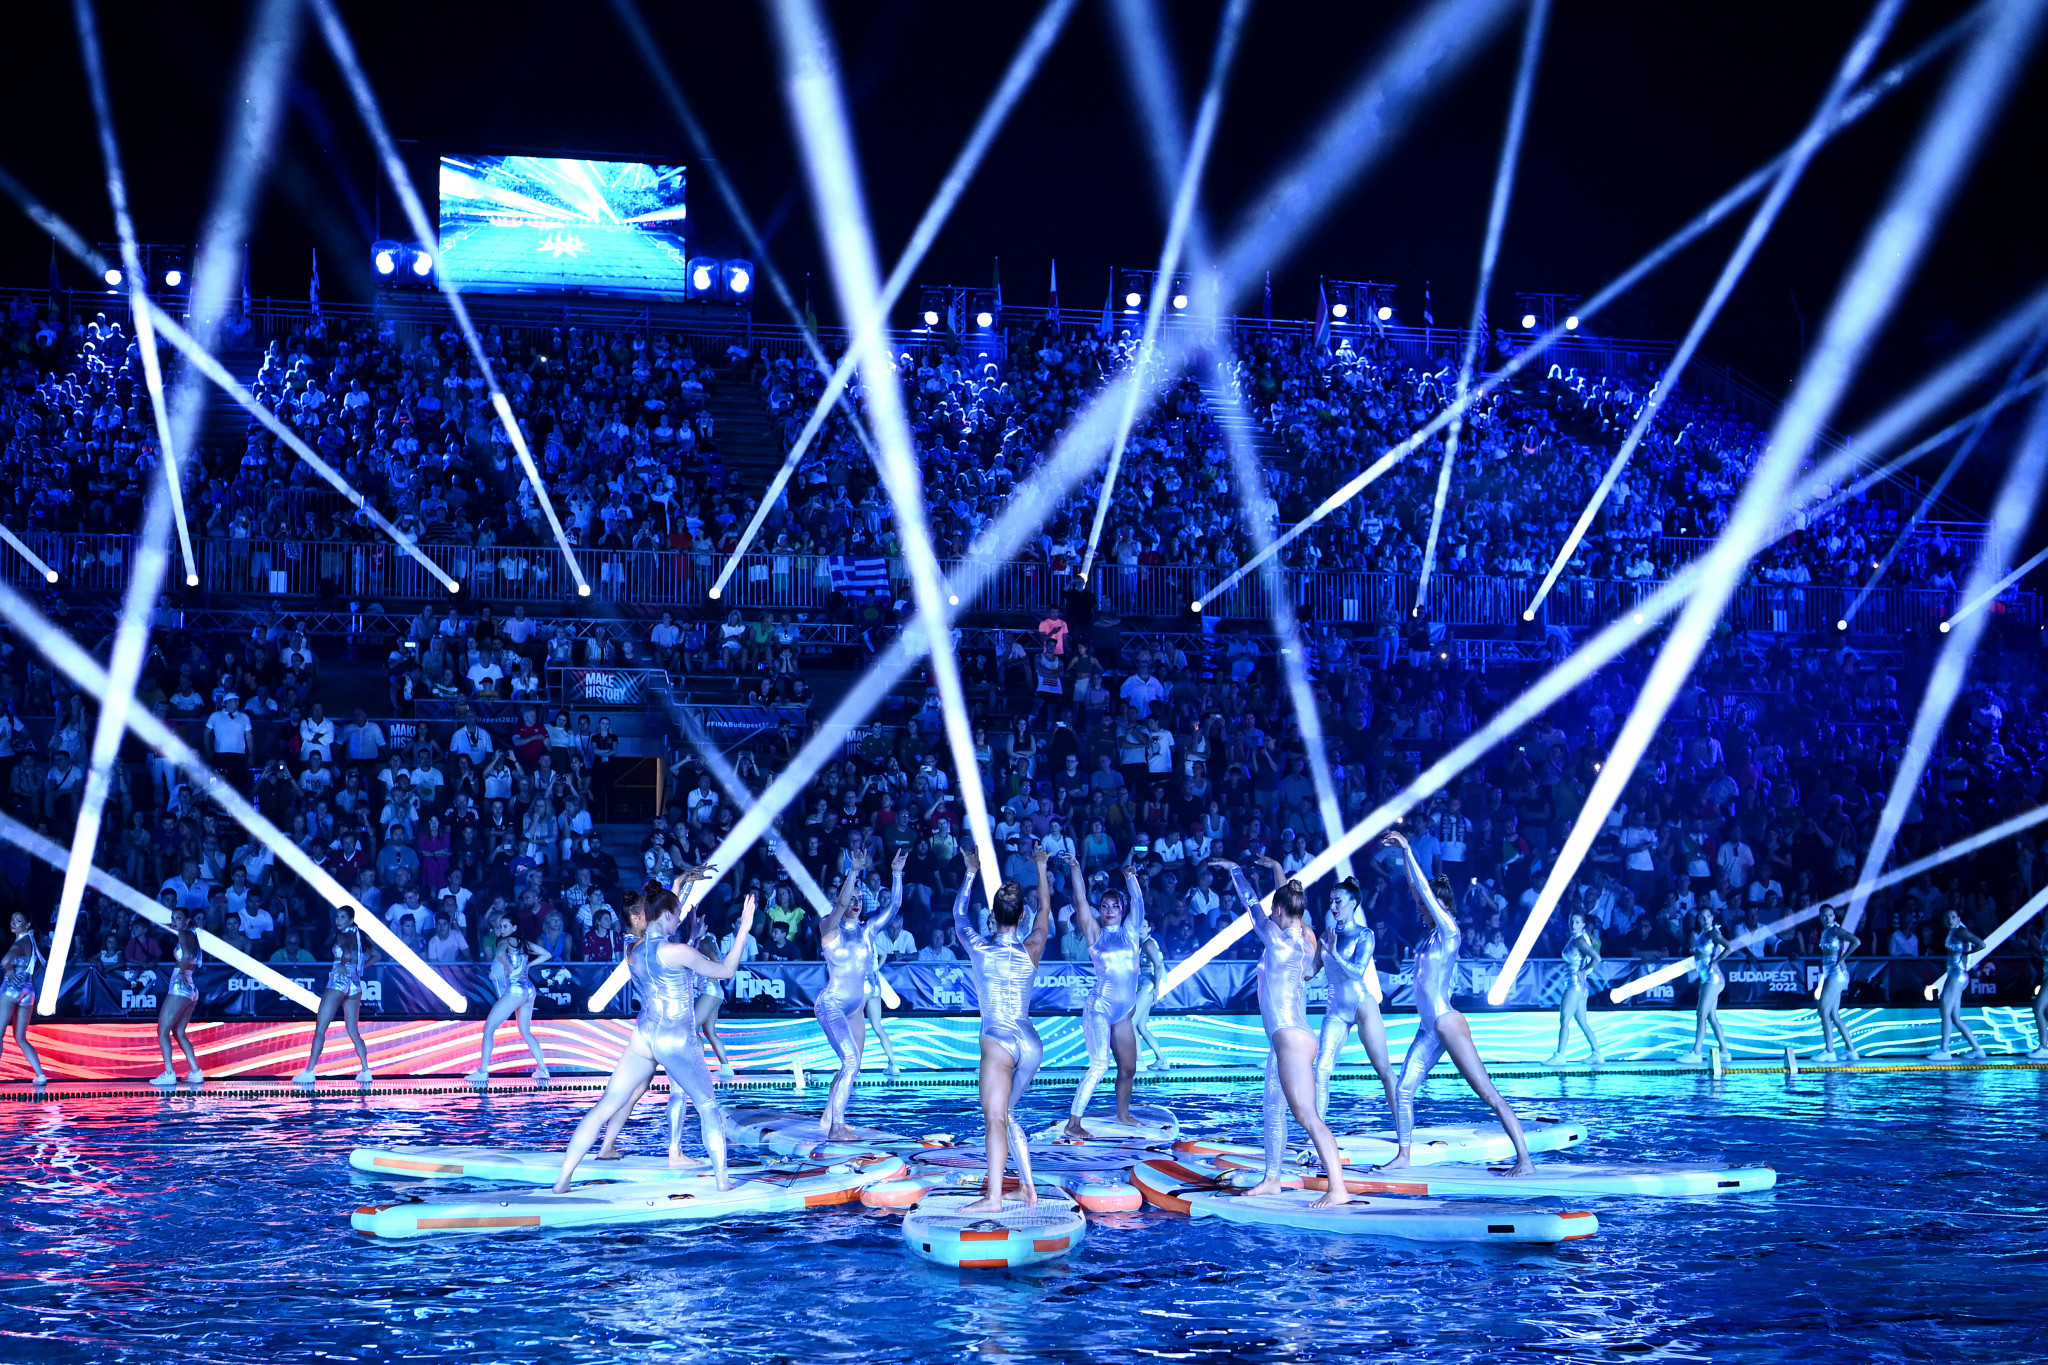 The Alfréd Hajós National Swimming Stadium was the venue for the Closing Ceremony of the World Championships ©Getty Images